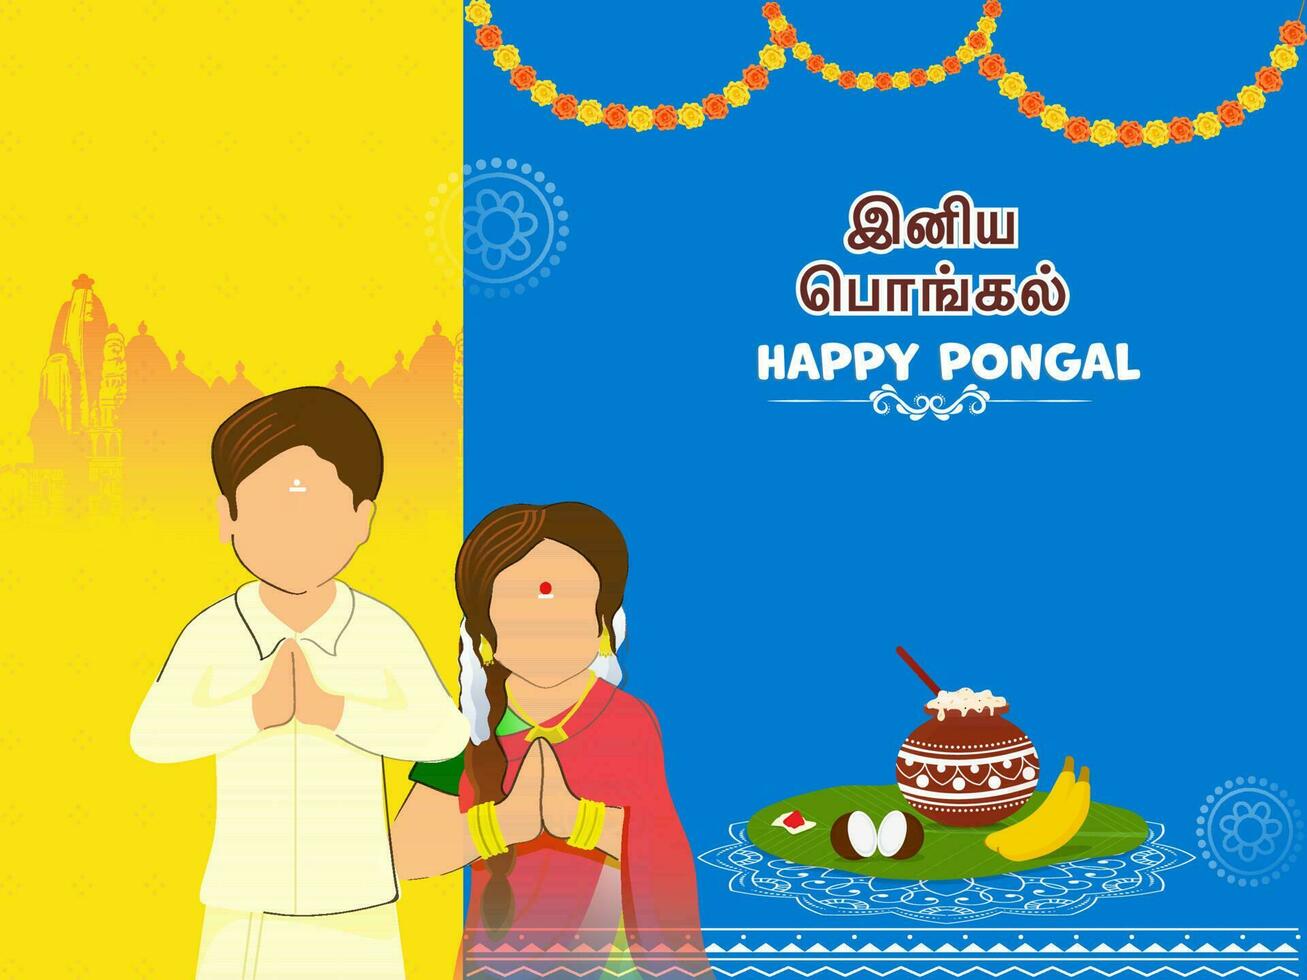 Tamil Lettering Of Happy Pongal With Faceless South Indian Couple Giving Greets, Traditional Dish In Mud Pot, Temple On Yellow And Blue Background. vector